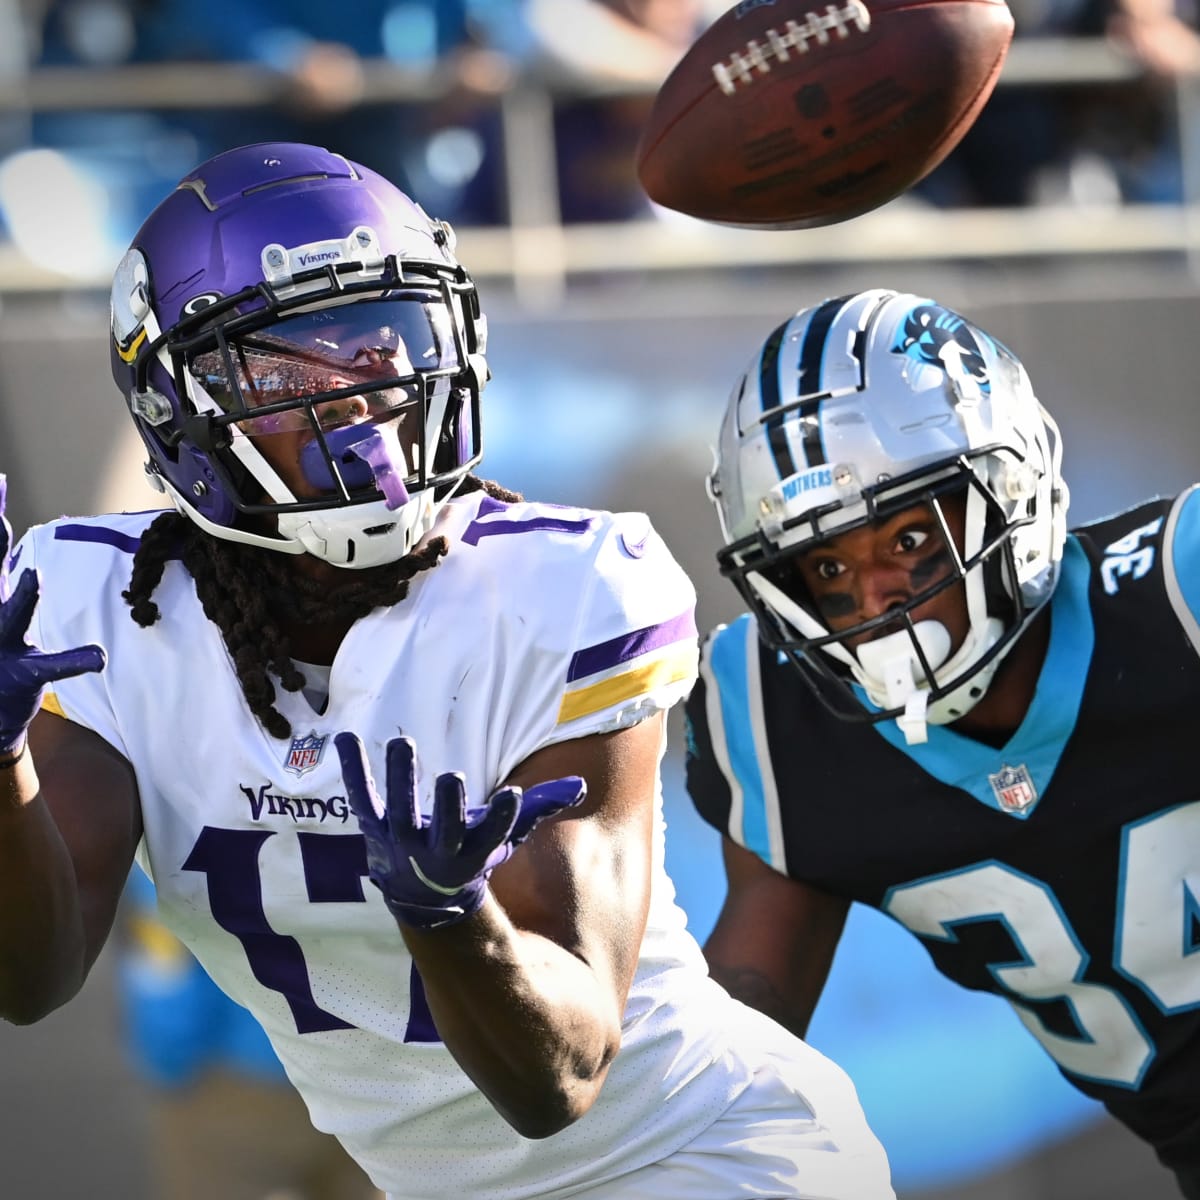 Vikings vs. Panthers Predictions & Best Bets